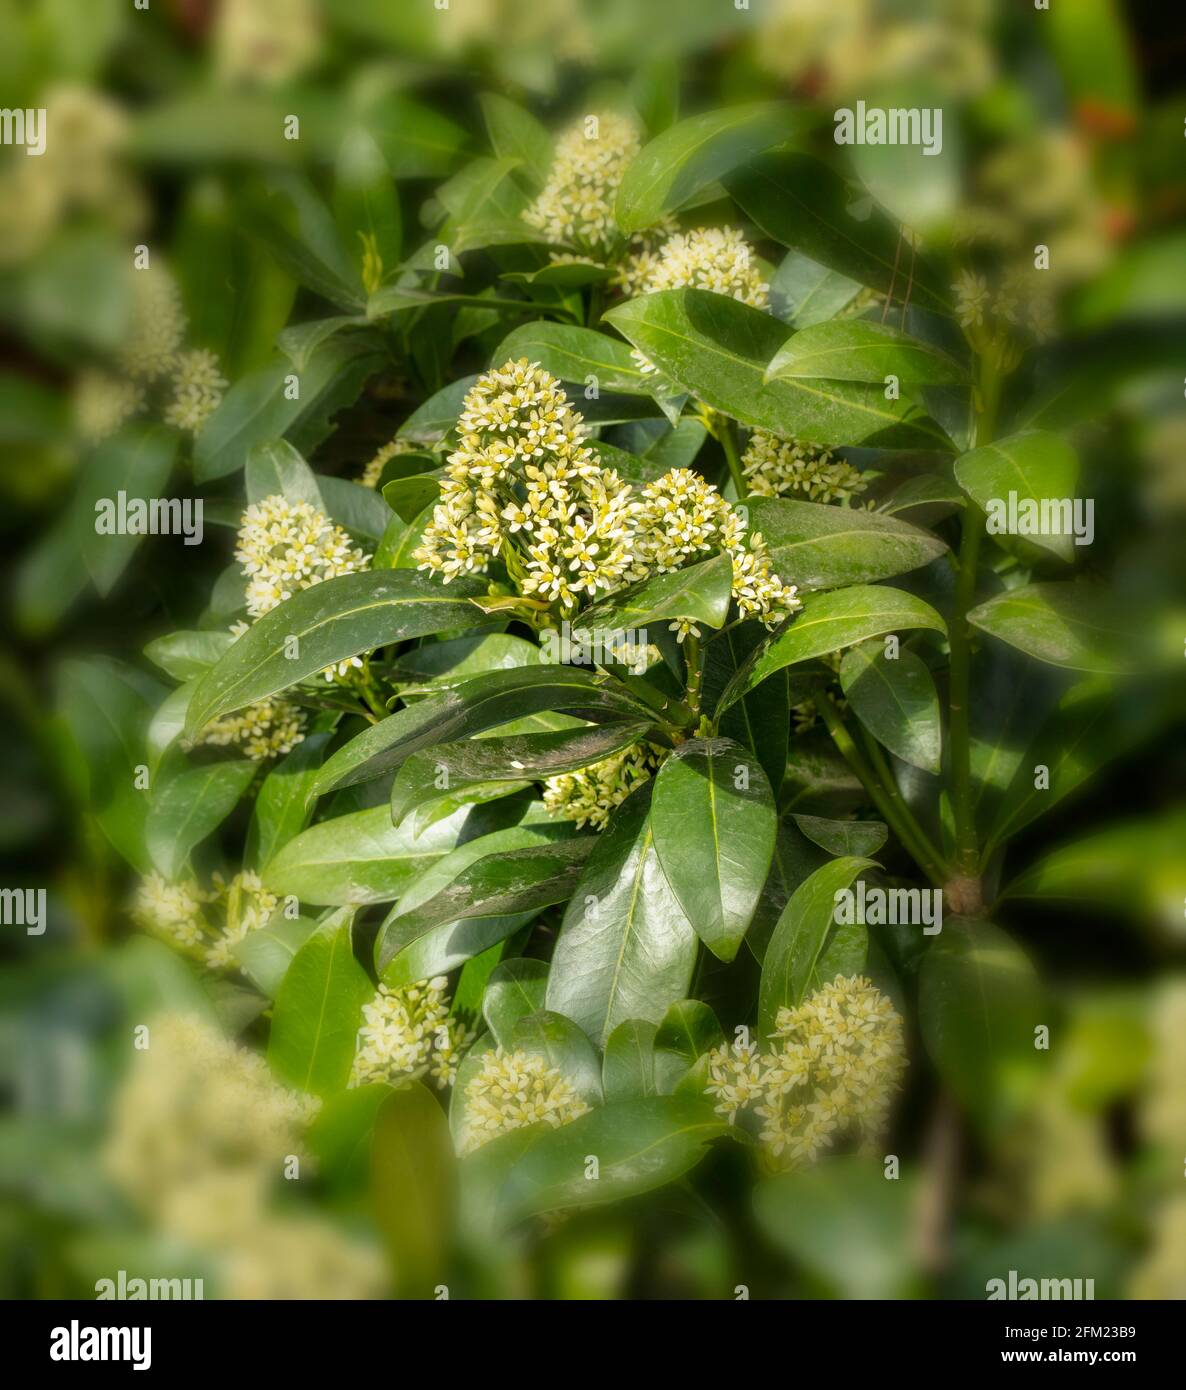 Skimmia flowers in close-up, background patterns and textures in nature Stock Photo